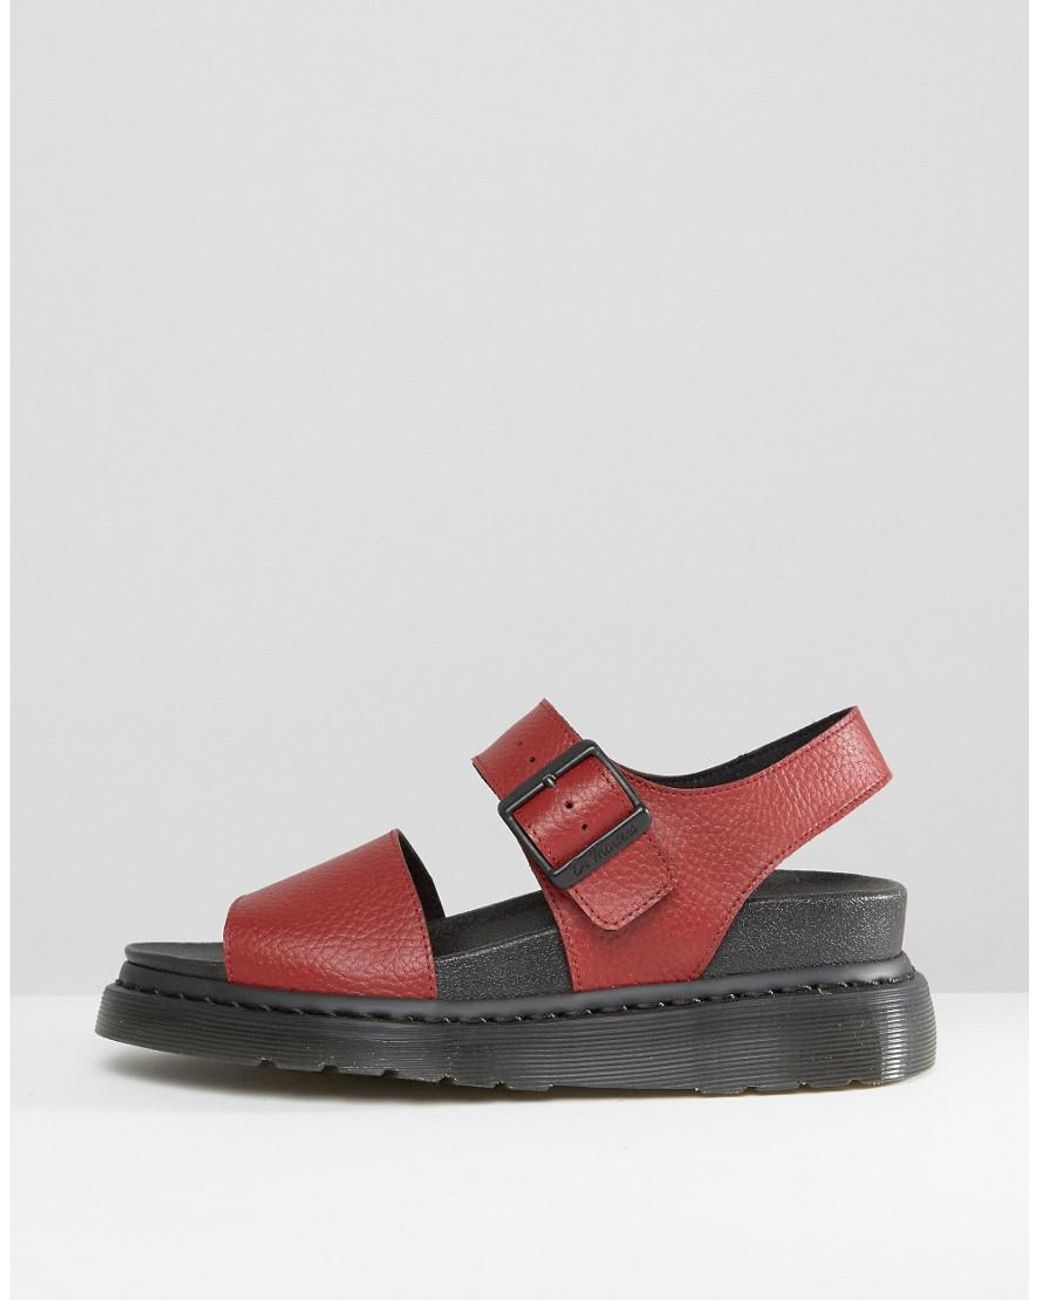 Dr. Martens Romi Red Leather Strap Flat Sandals | Lyst